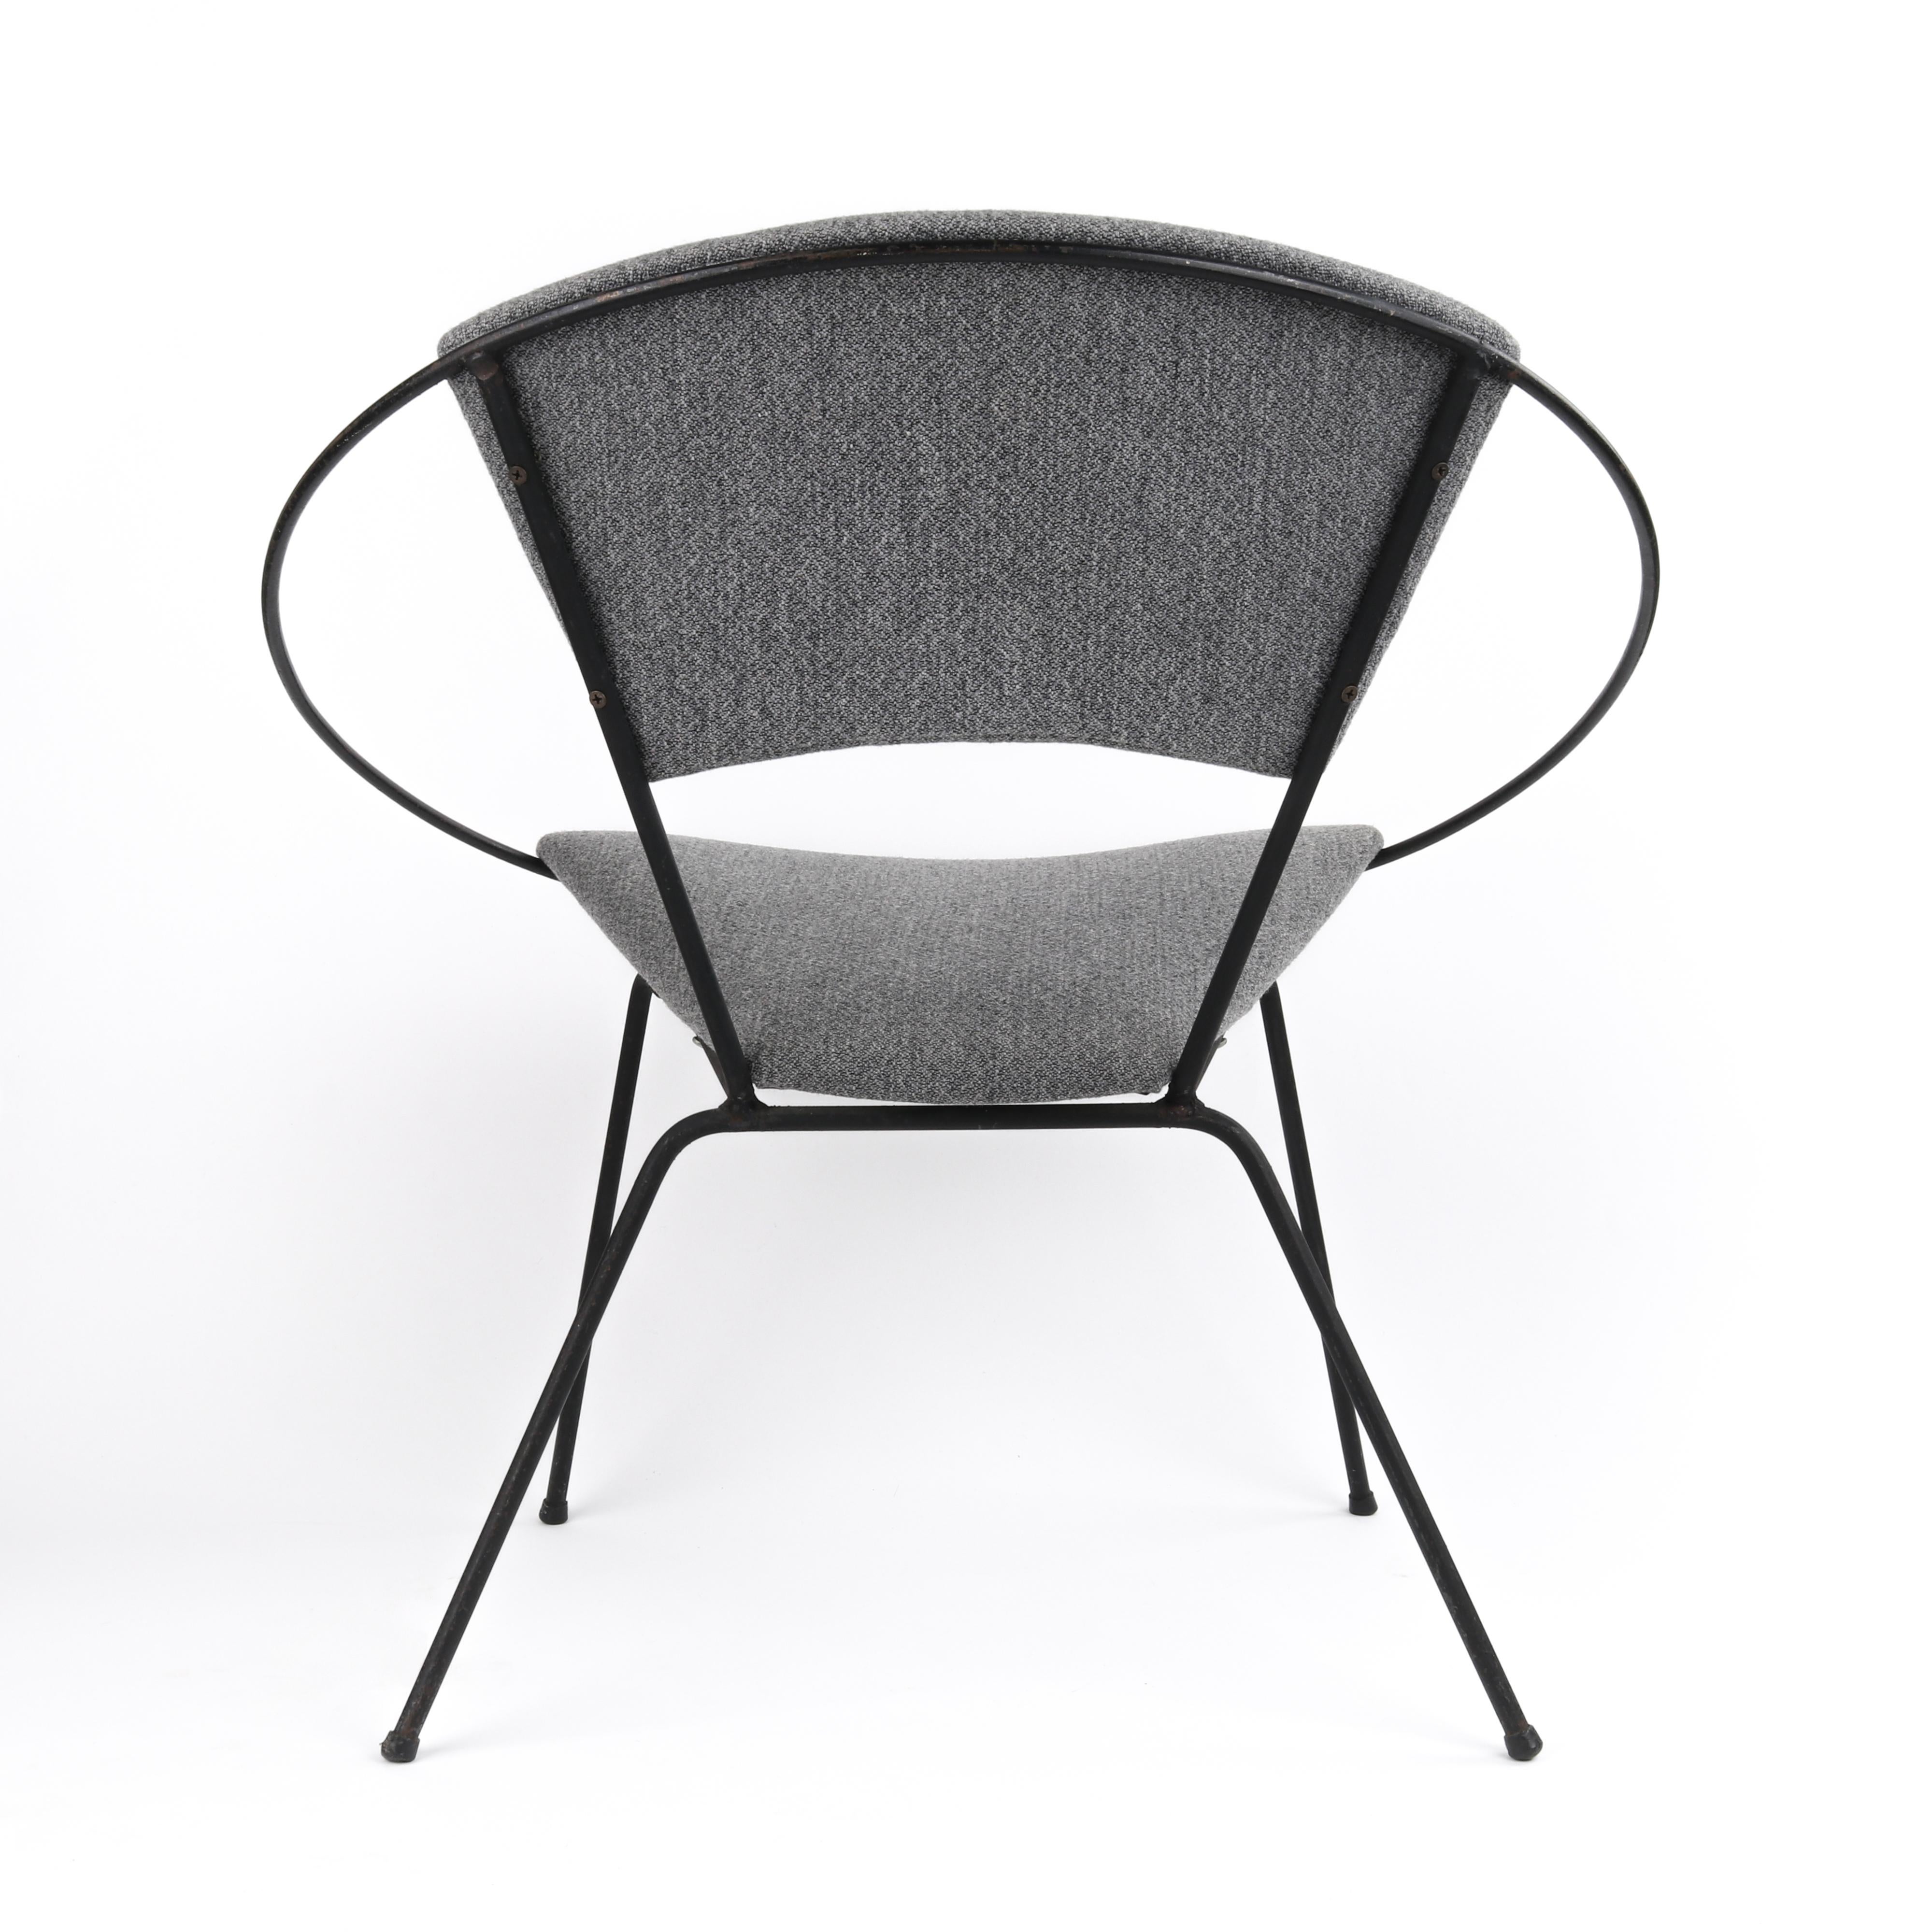 American Joseph Cicchelli for Reilly-Wolff 1950's Iron Circle Hoop Upholstered Chair For Sale